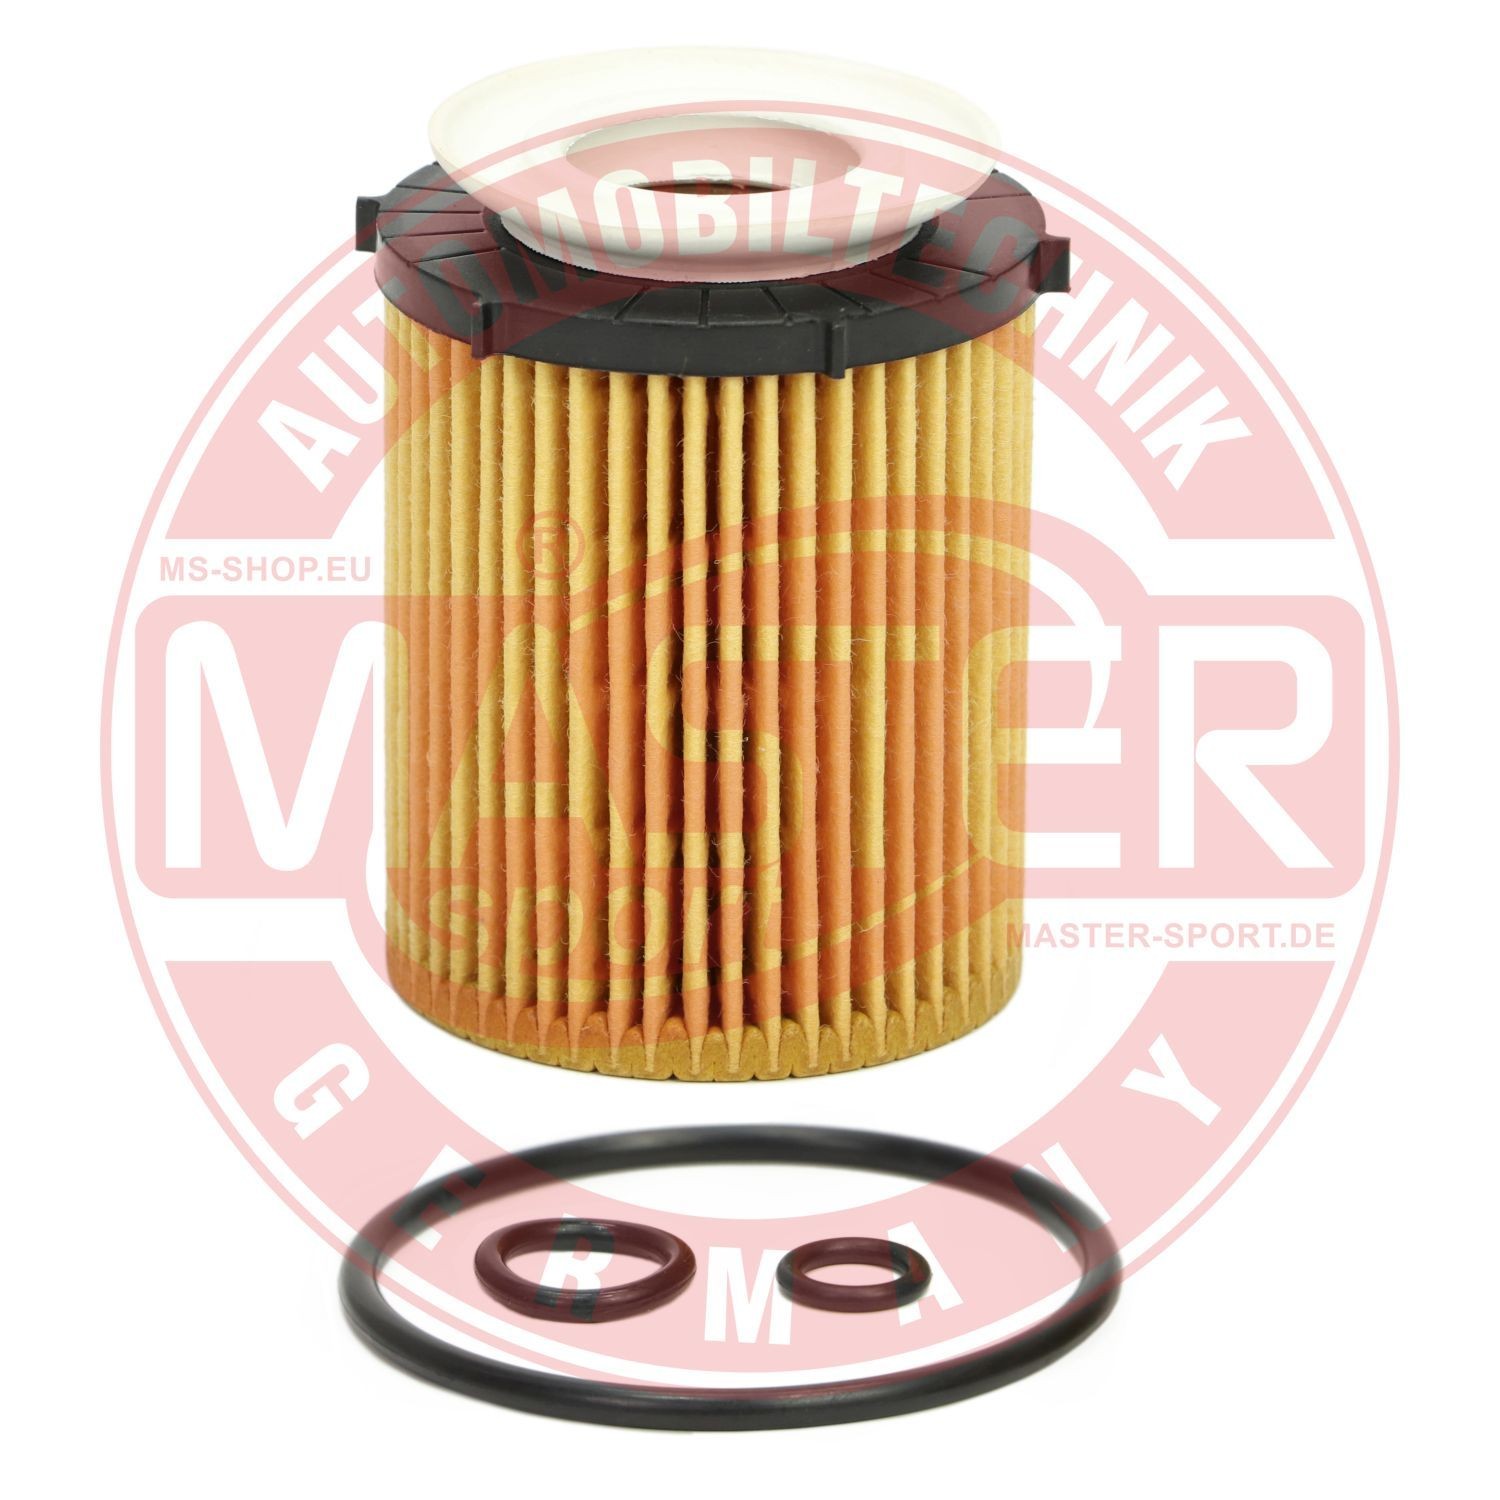 MASTER-SPORT 711/6Z-OF-PCS-MS Oil filter with gaskets/seals, Filter Insert